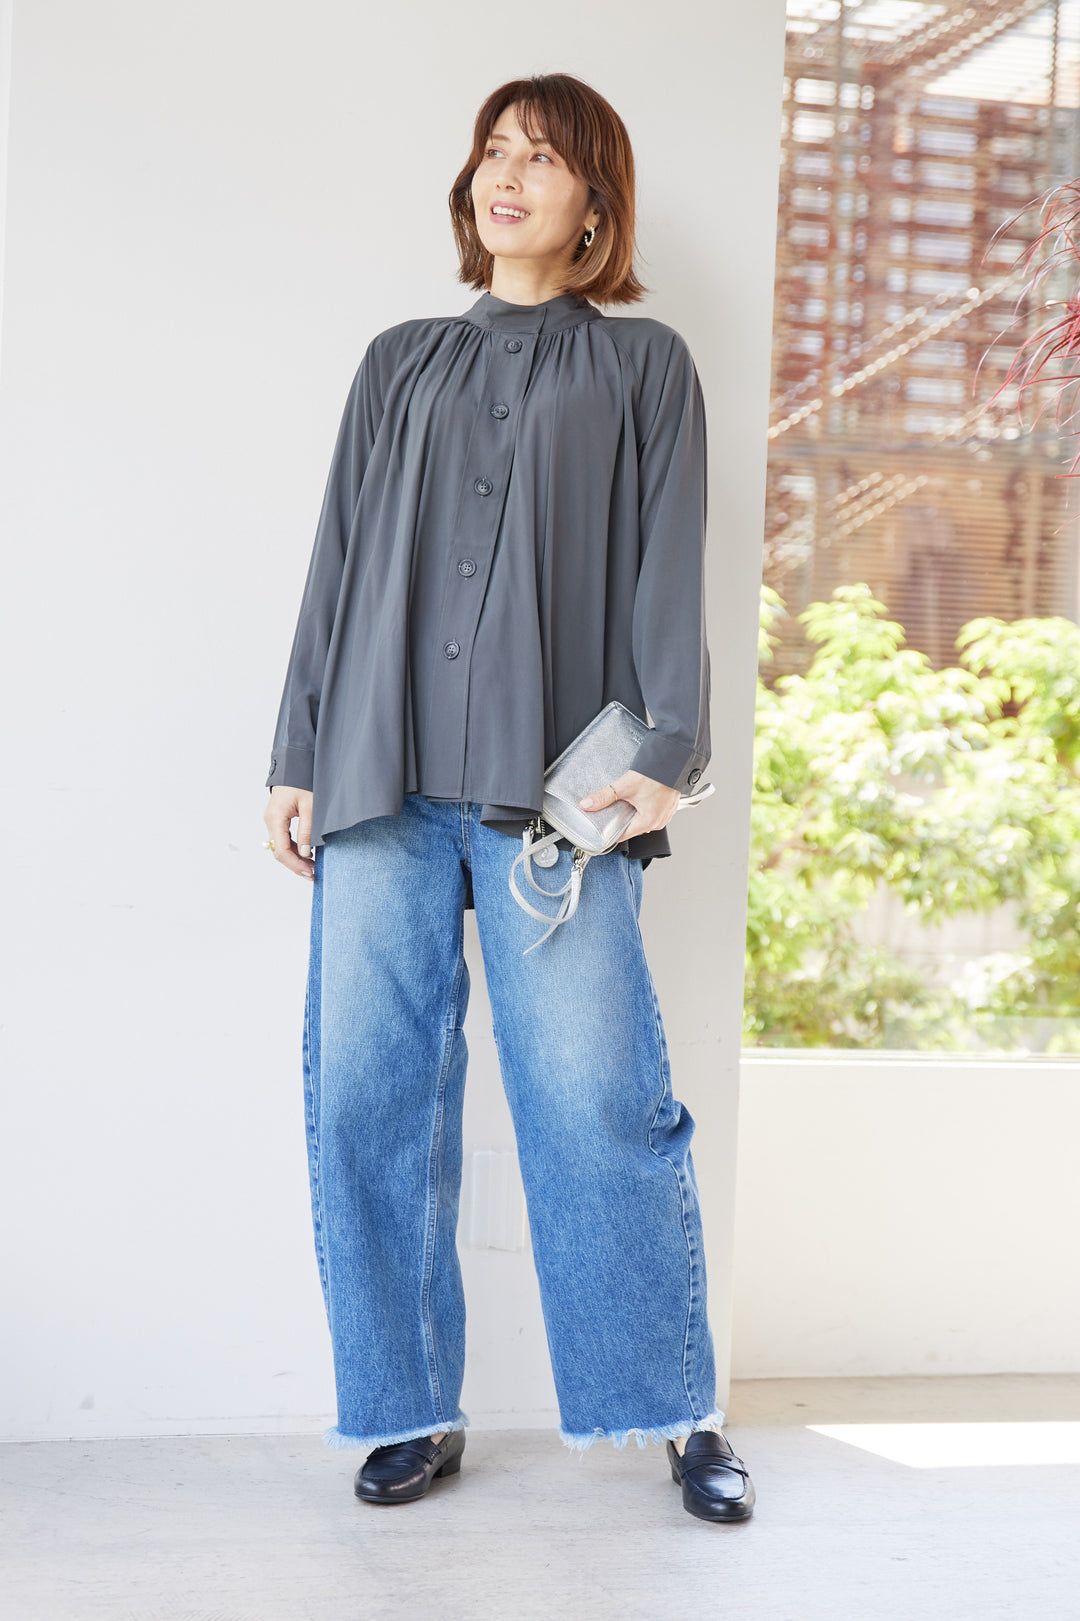 Gathered stand-up neck blouse